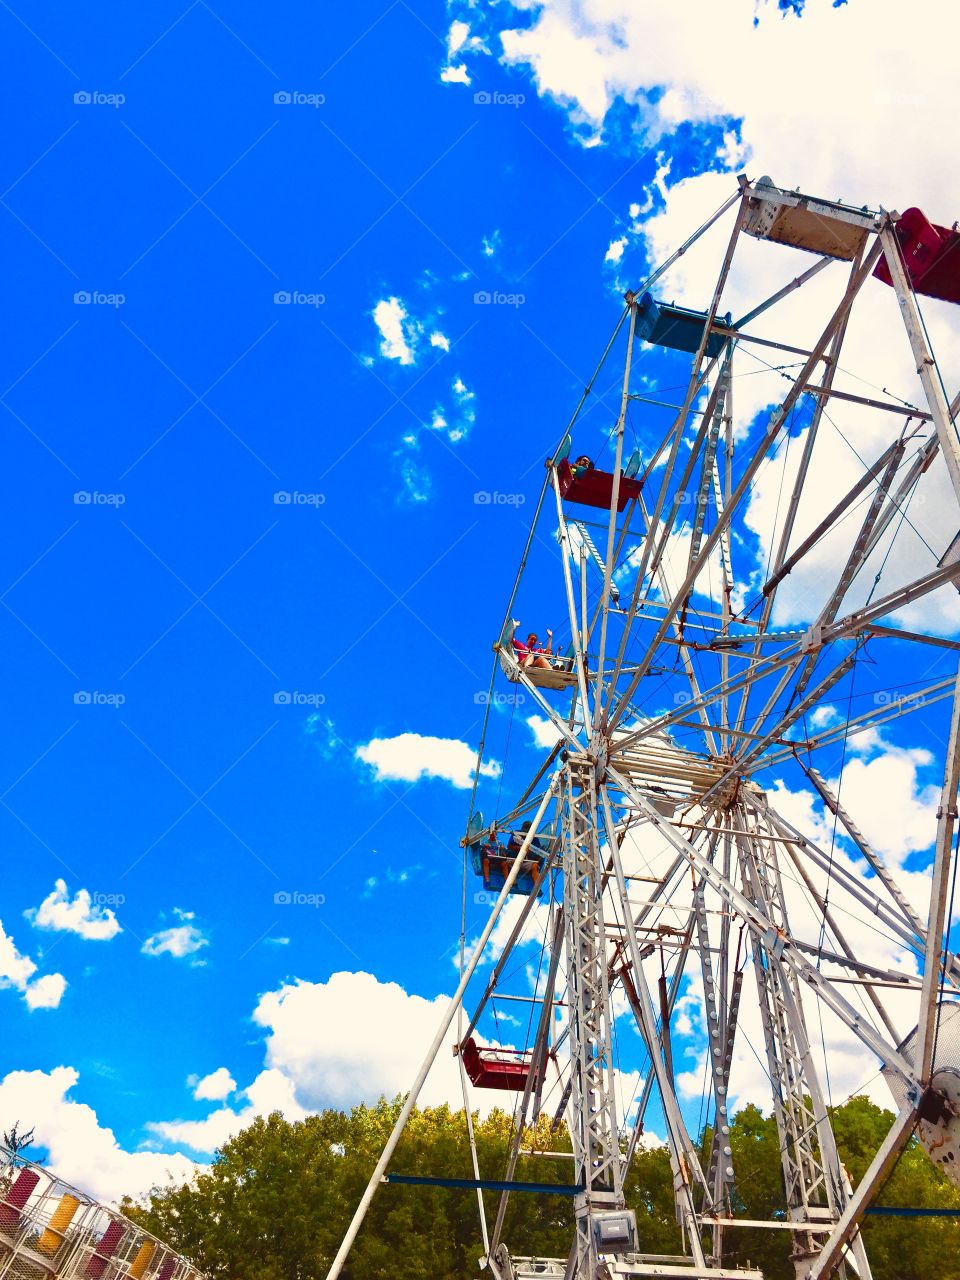 Ferris wheel fun at the local carnival ride making summer memories with the kids